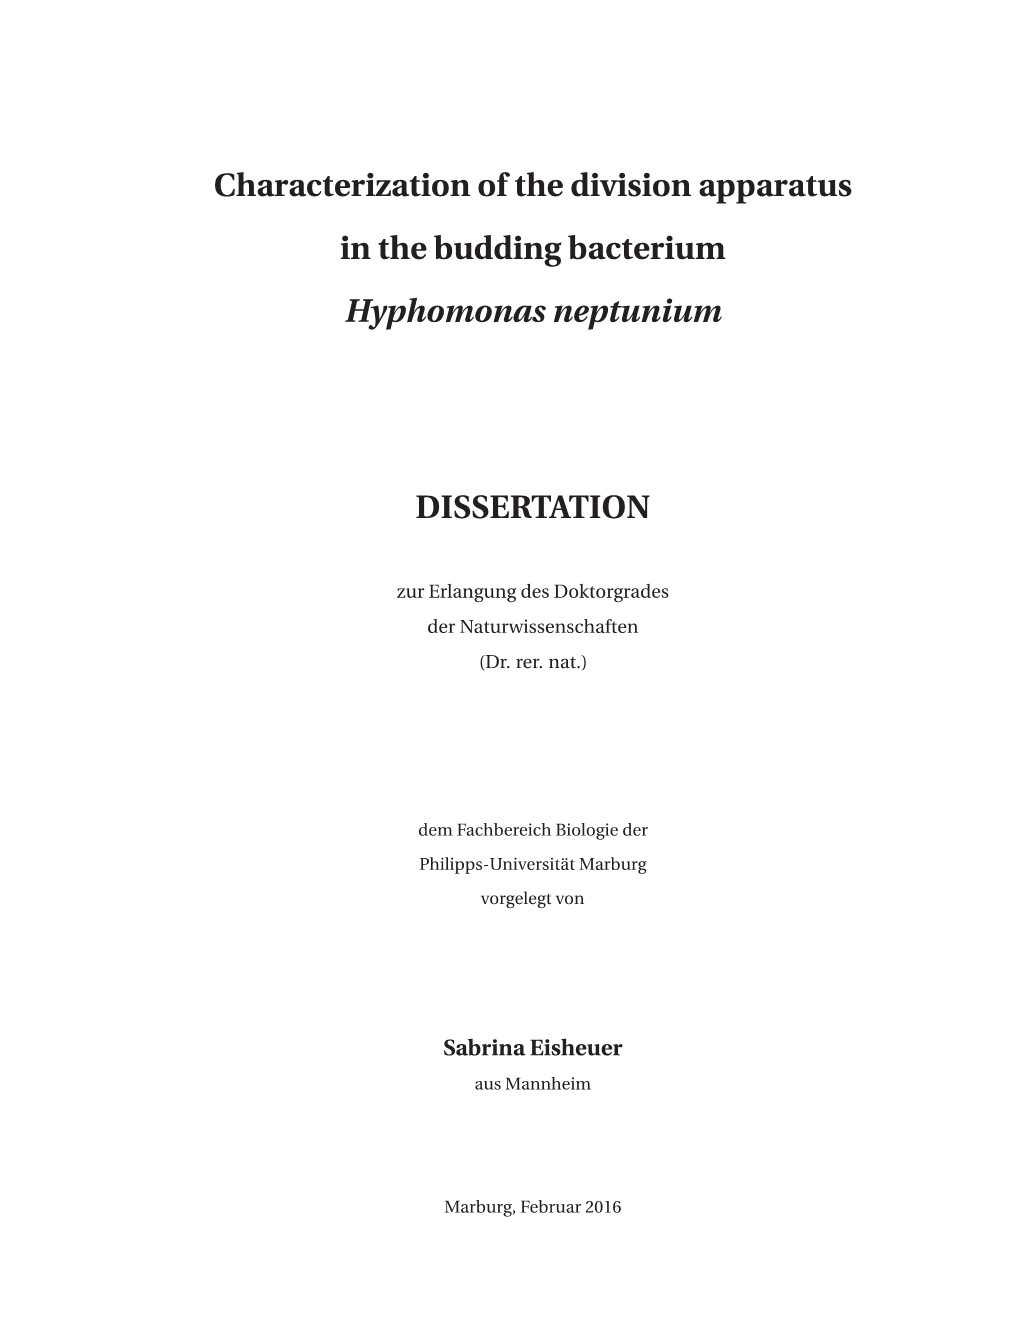 Characterization of the Division Apparatus in the Budding Bacterium Hyphomonas Neptunium